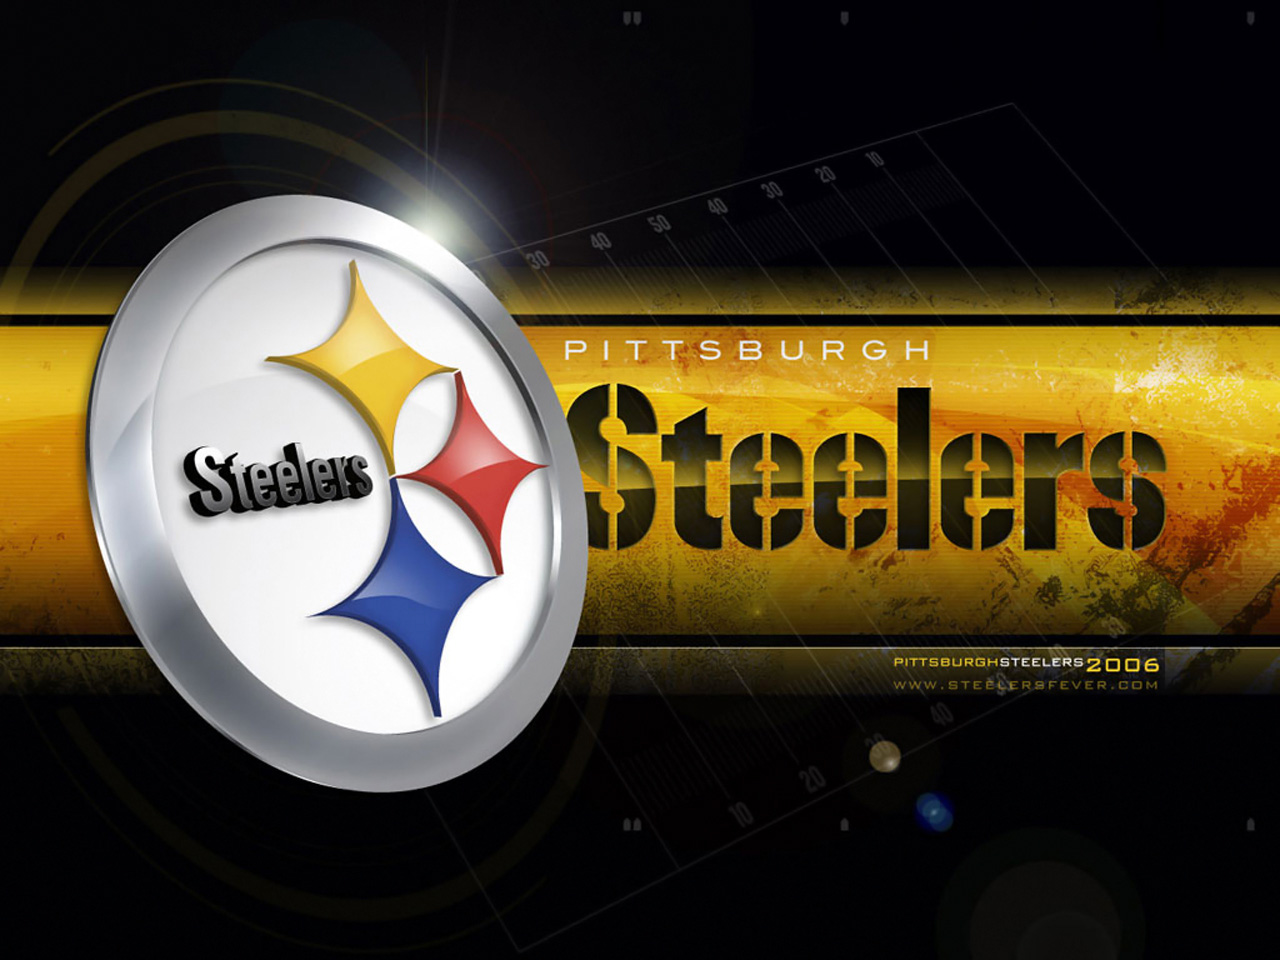 pittsburgh steelers wallpaper,product,logo,advertising,games